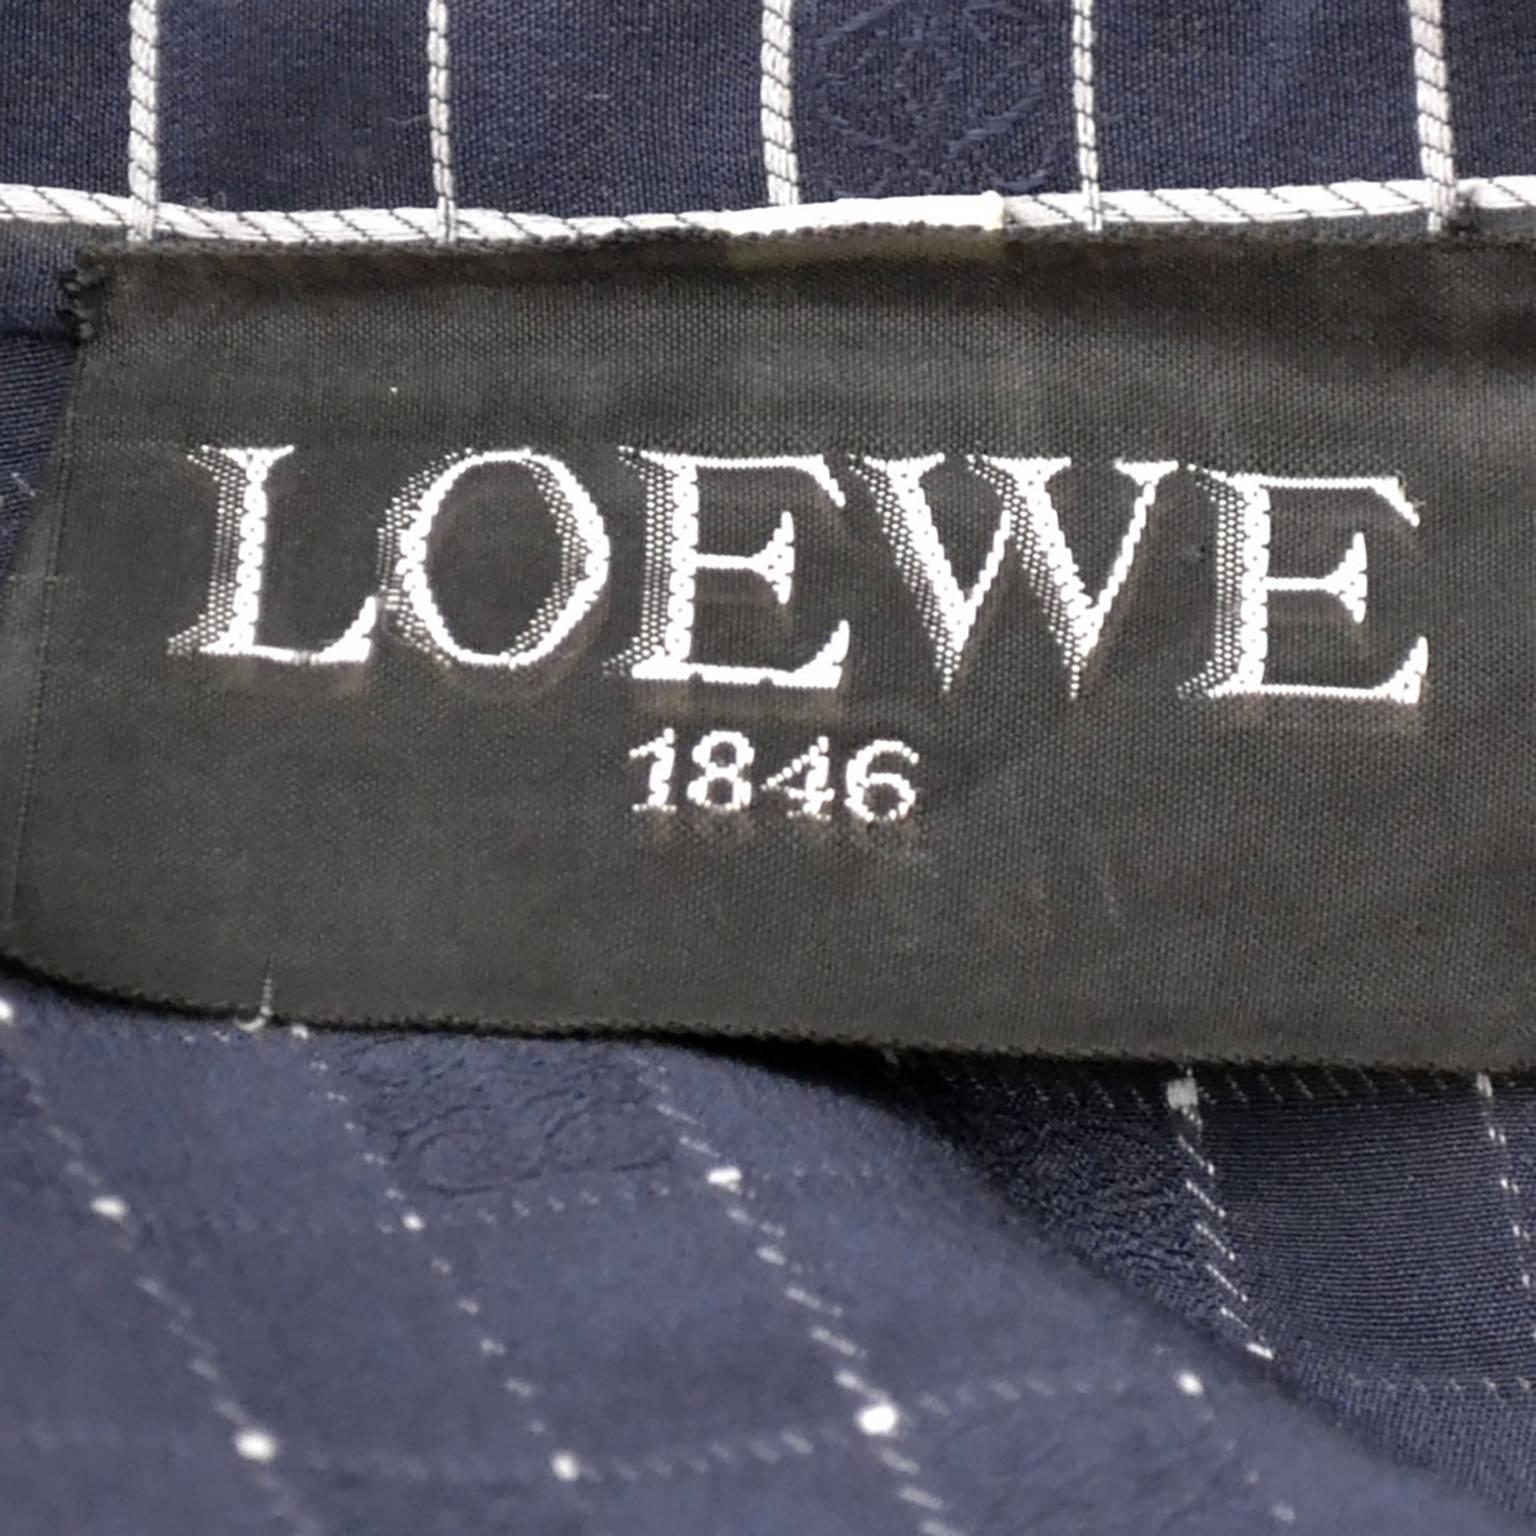 Loewe Spain Vintage Dress and Scarf 1970s Navy Blue and White 1